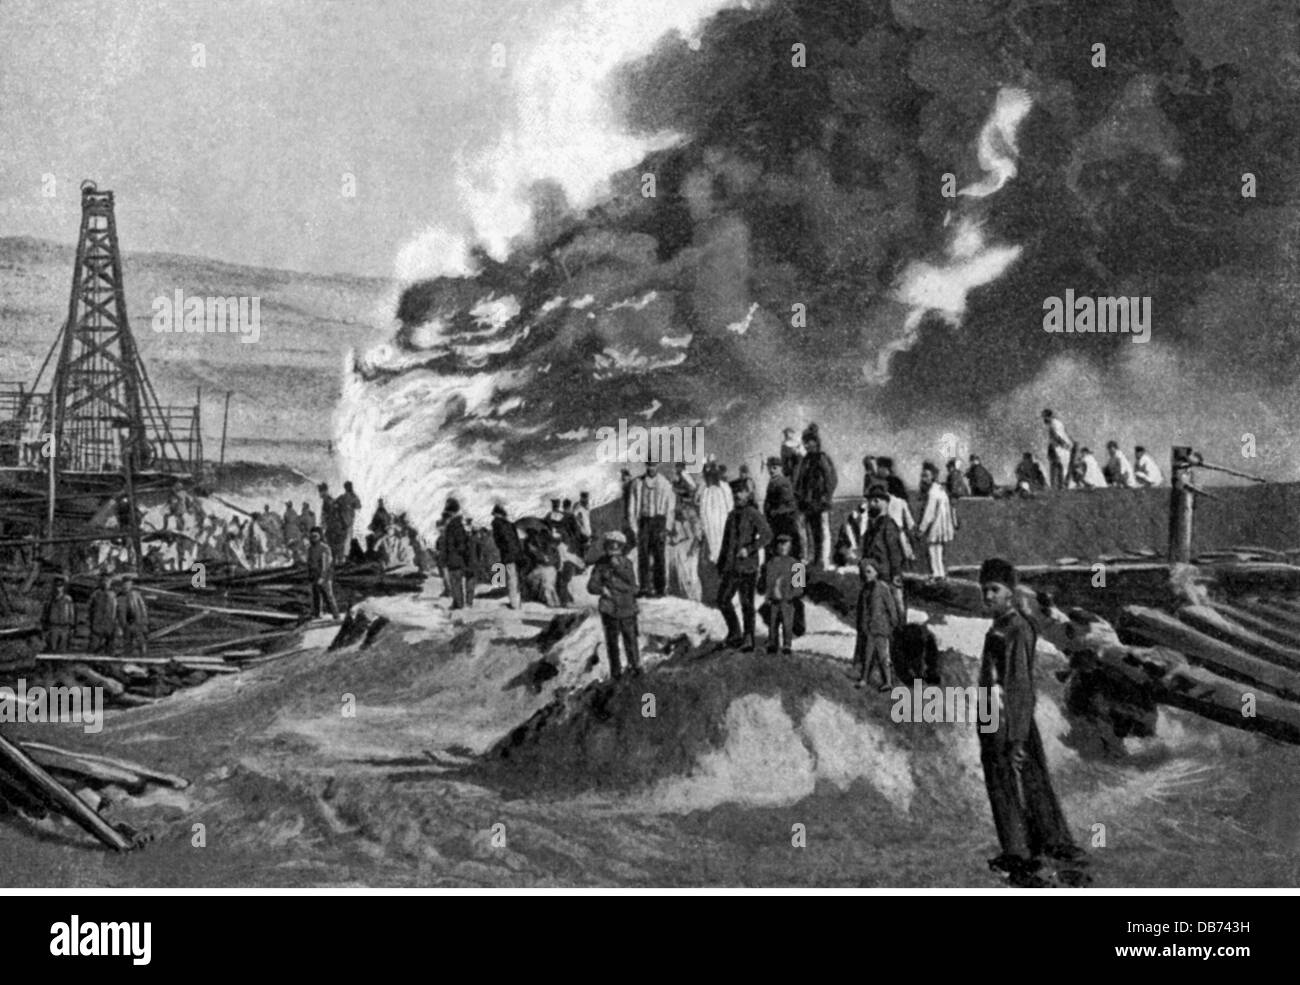 energy,petroleum,oil well burning,Baku,after a photograph,late 19th century,19th century,Russia,Azerbaijan,drilling derrick,wellhead,boring tower,boring trestle,drill tower,drill rig,drilling derricks,wellheads,boring towers,boring trestles,drill towers,drill rigs,oil extraction,oil production,crude oil,crude naphtha,raw oil,base oil,rock oil,crude petroleum,oil,resource,assign resources,raw material,raw materials,crude materials,accident,accidents,disaster,disasters,catastrophe,catastrophes,pressure,fire,fires,on fir,Additional-Rights-Clearences-Not Available Stock Photo